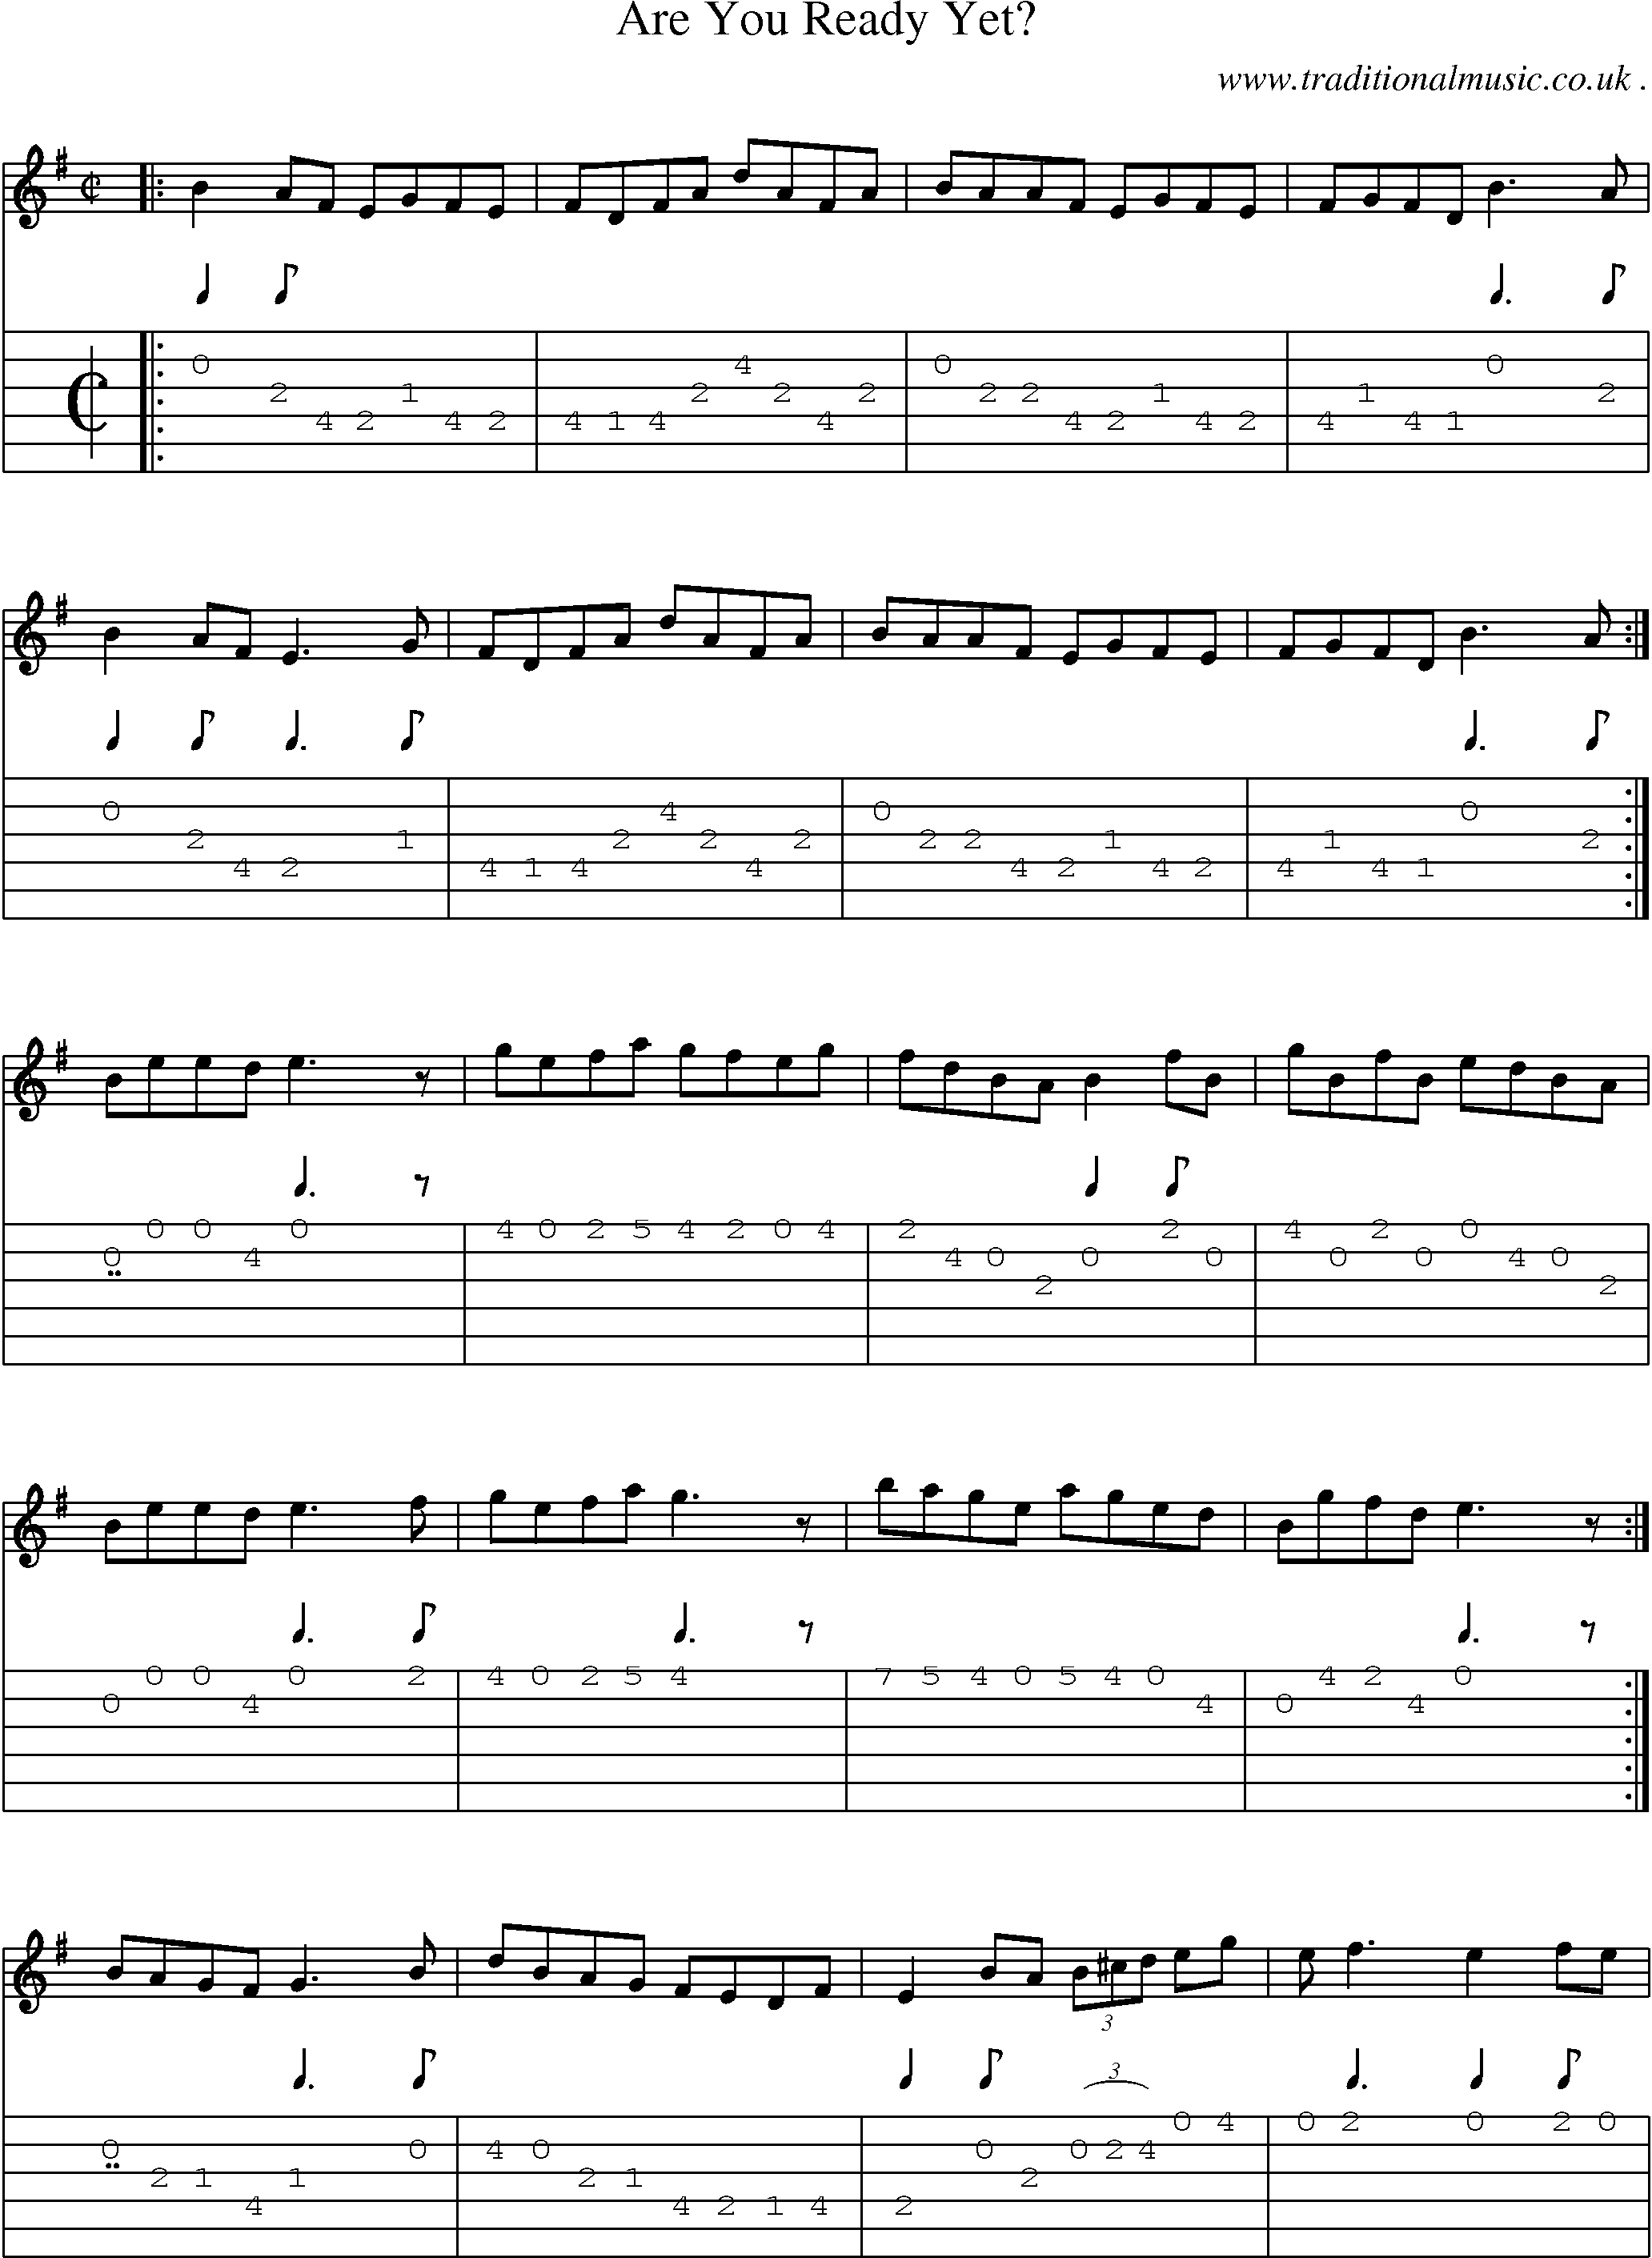 Sheet-Music and Guitar Tabs for Are You Ready Yet